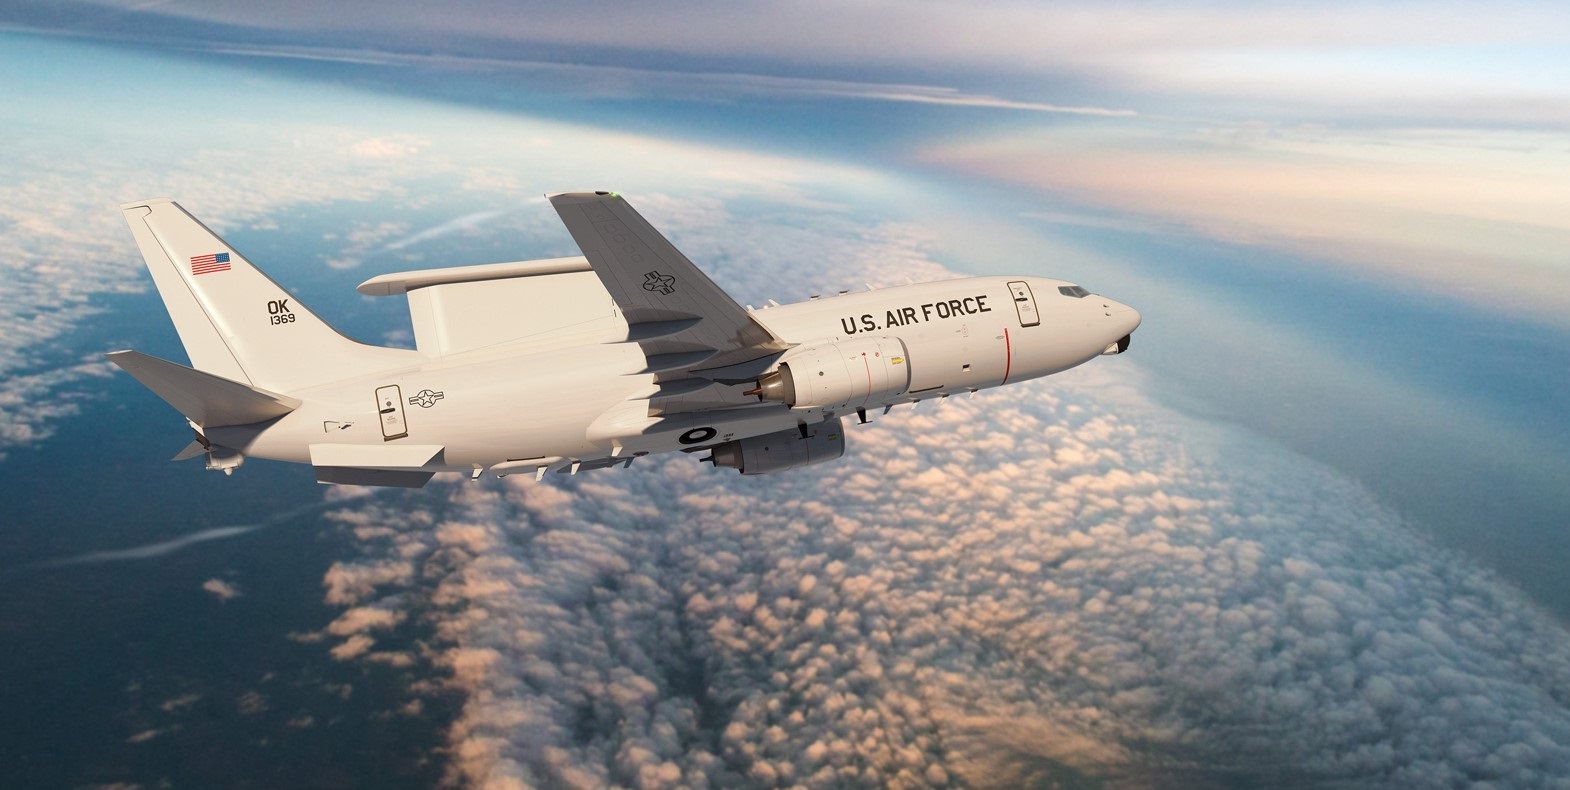 Boeing gets $1.2bn to produce two E-7 AEW&C aircraft for US Air Force